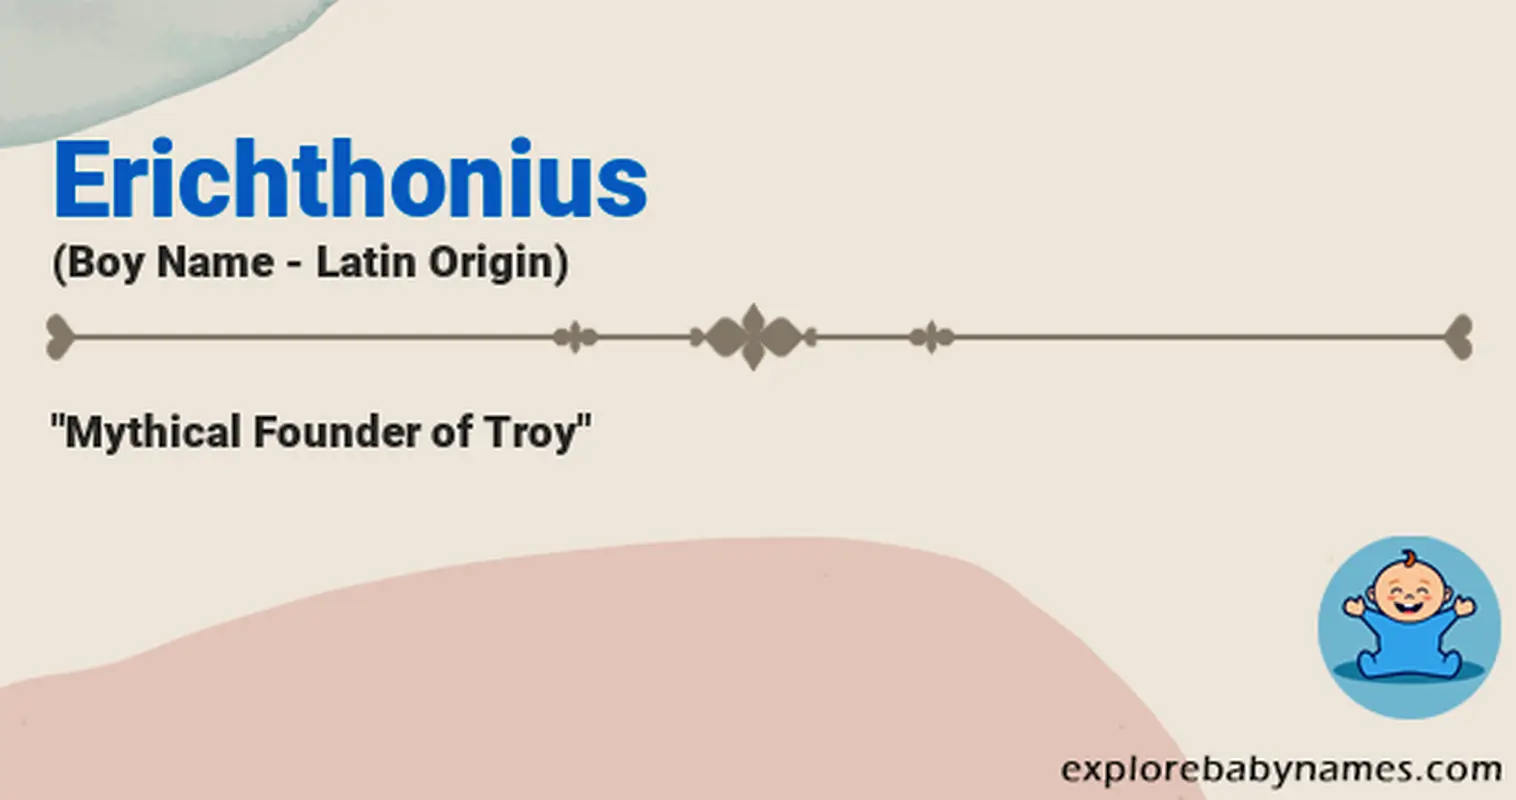 Meaning of Erichthonius